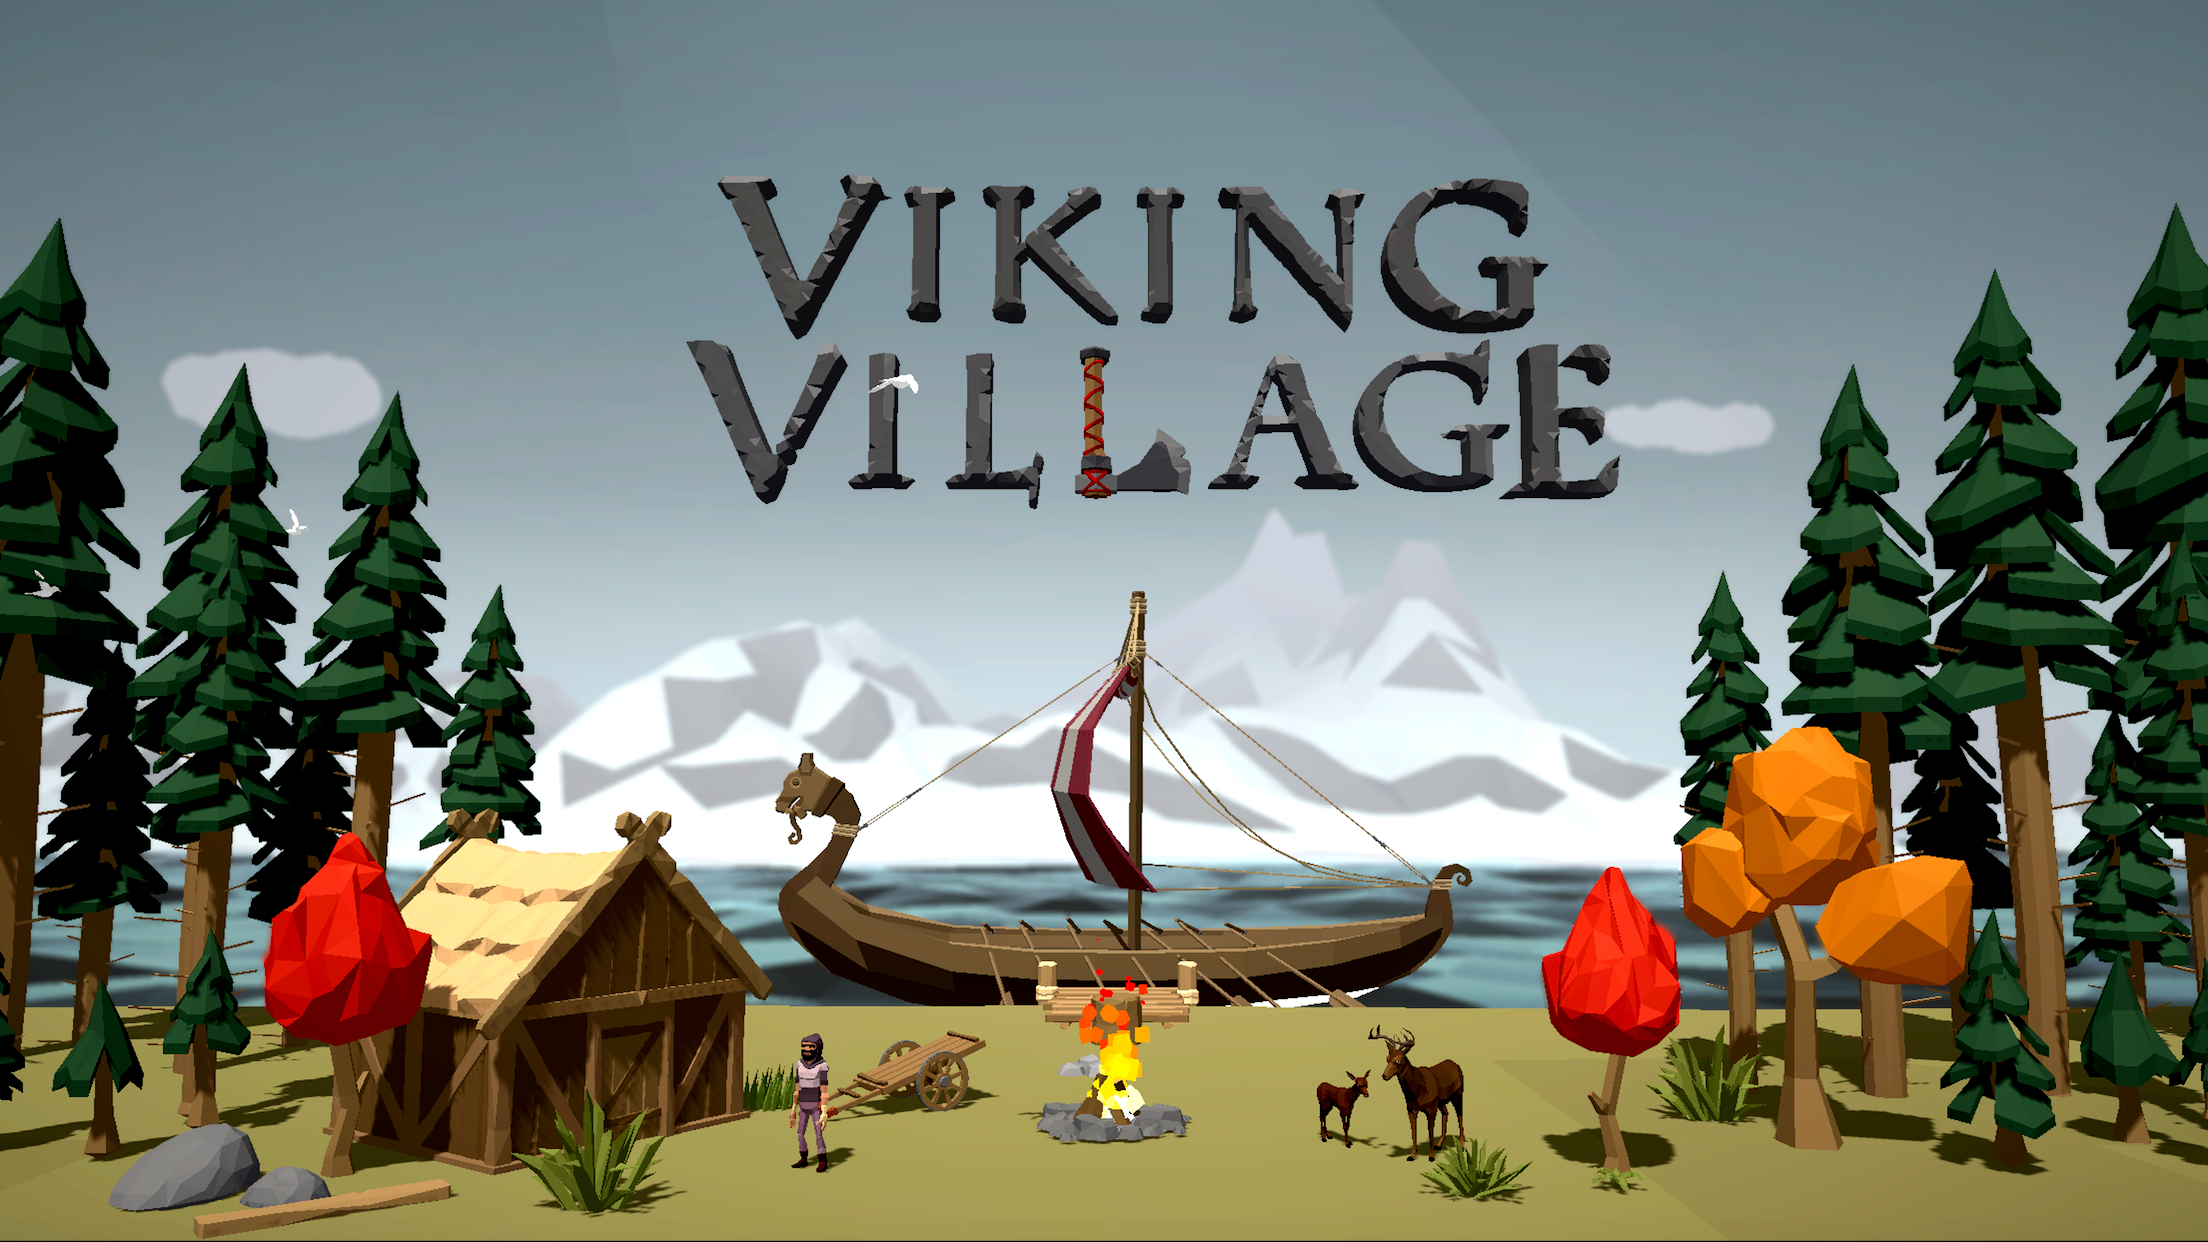 Viking Village - A Minimalist RTS - Release Announcements - itch.io